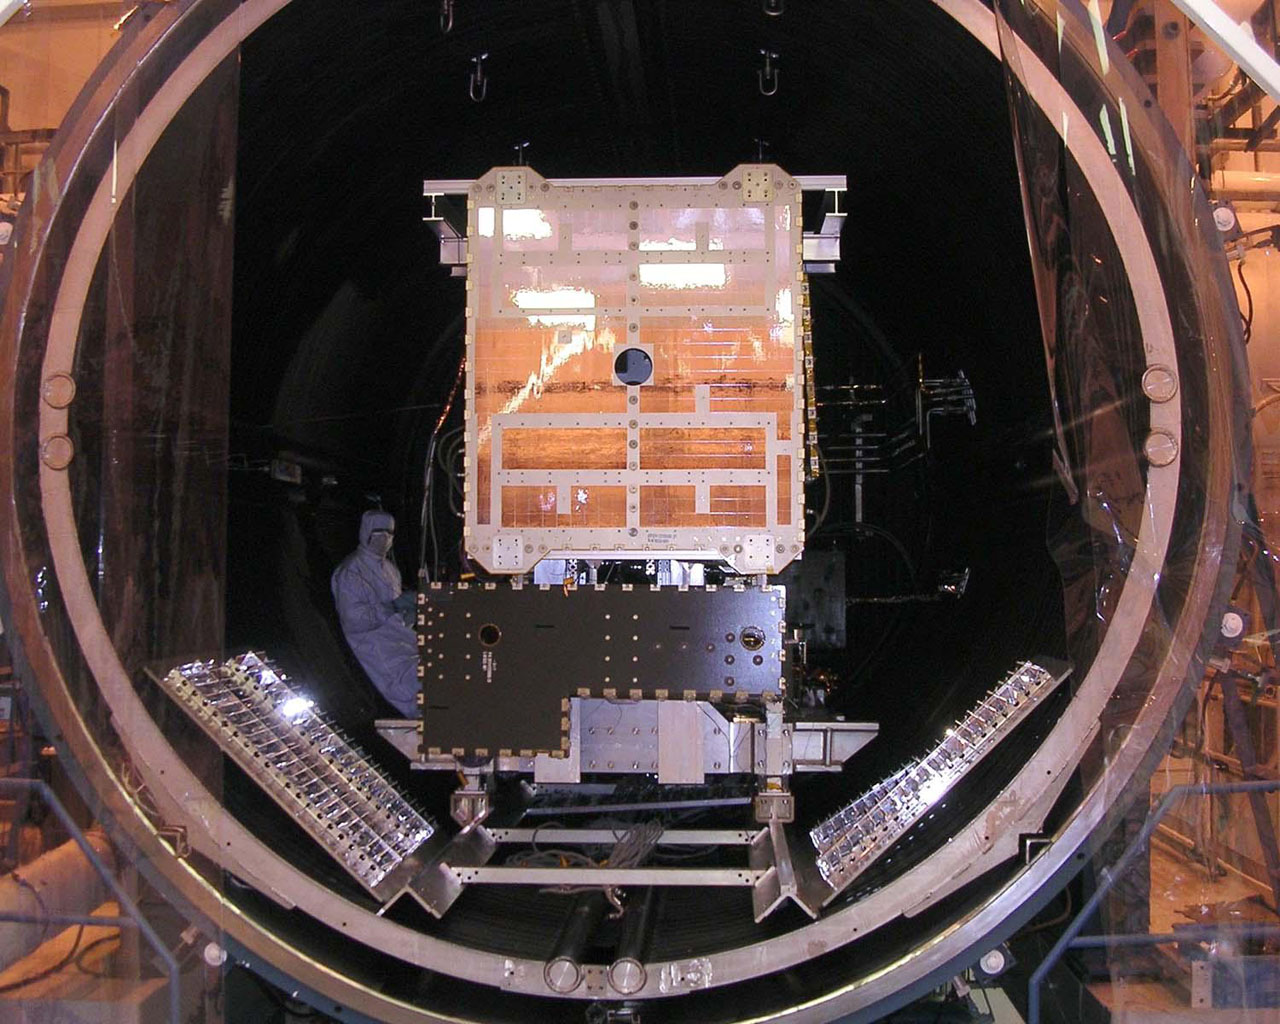 Space Images | Dawn Spacecraft in Thermal Vacuum Chamber1280 x 1024